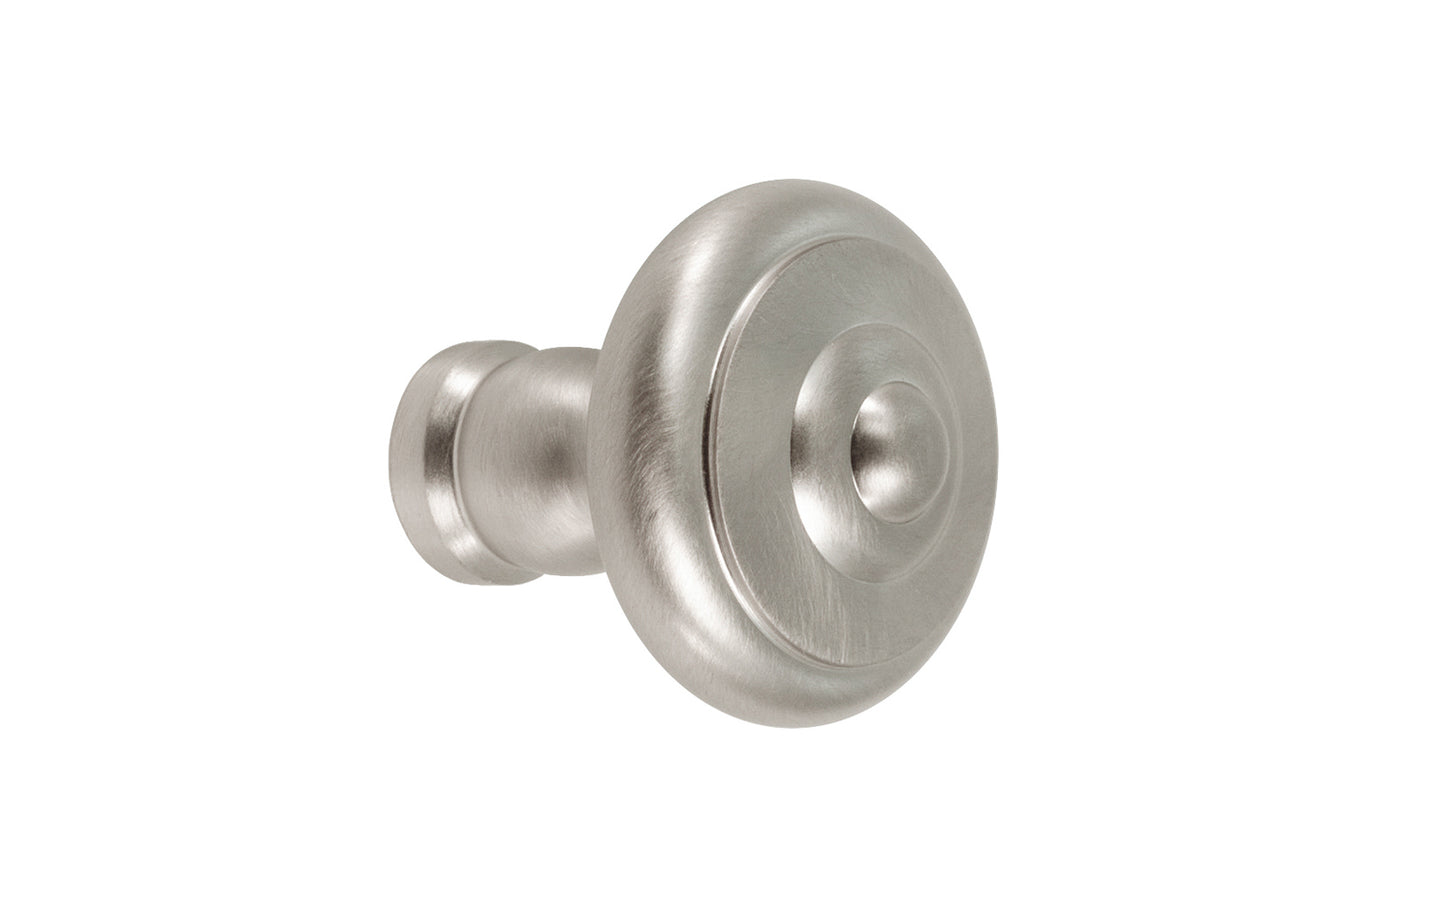 Vintage-style Hardware · Solid Brass classic contemporary style cabinet knob designed in the Mid-Century style. Quality solid brass 1" diameter Knob. Ideal for kitchen & bathroom cabinets, & furniture. Brushed nickel finish.